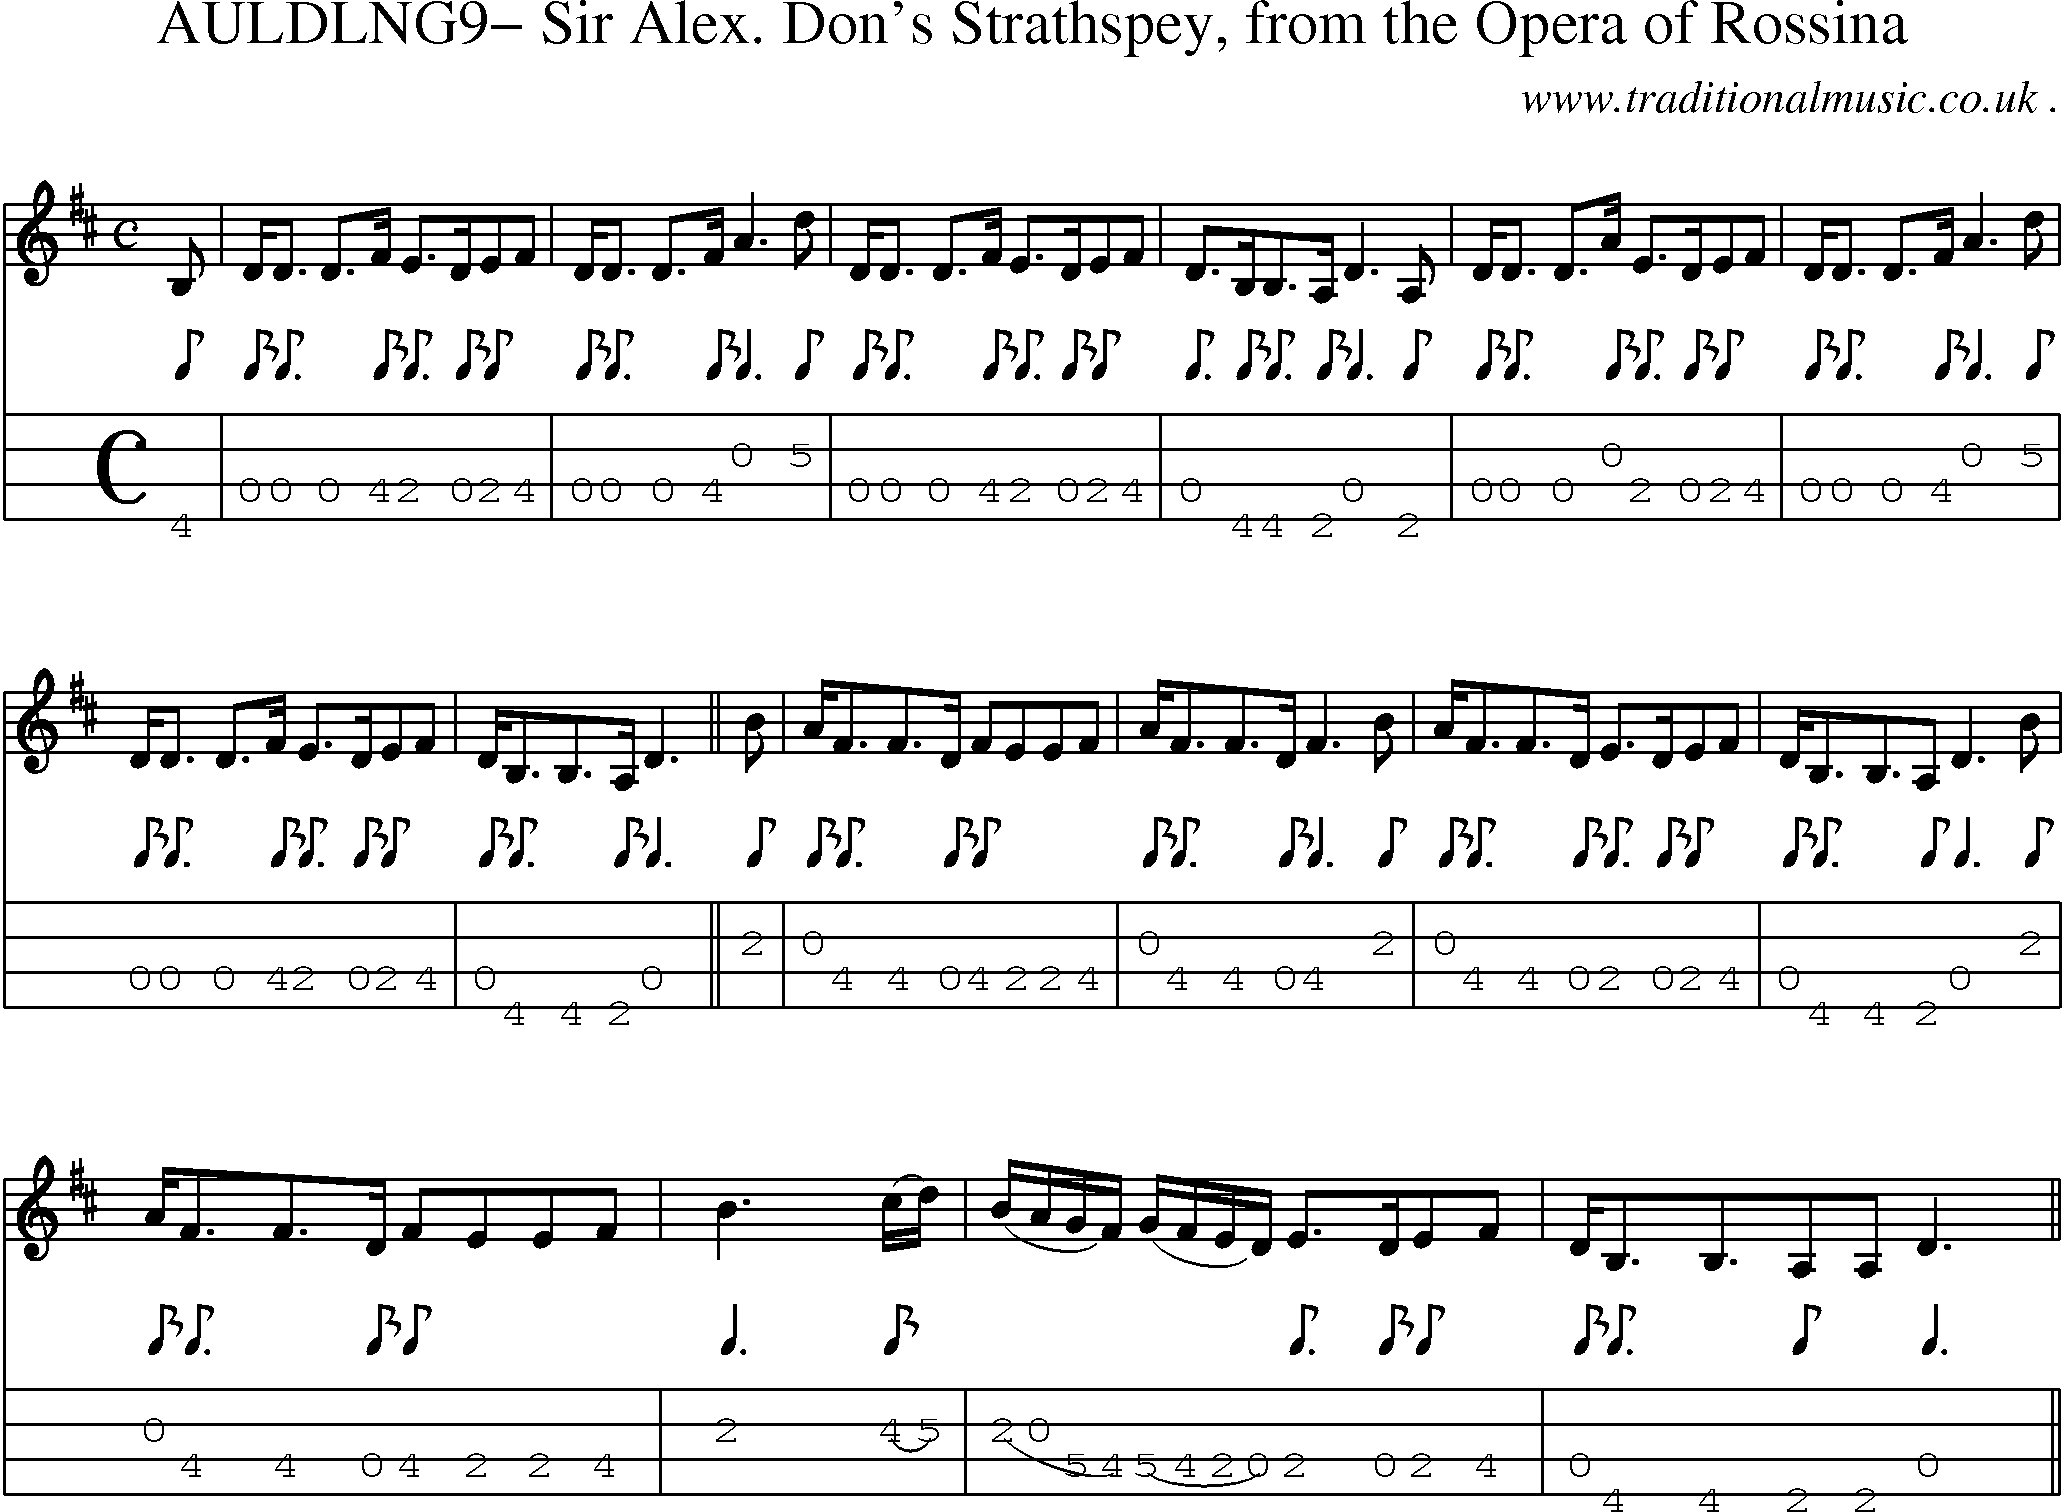 Sheet-Music and Mandolin Tabs for Auldlng9 Sir Alex Dons Strathspey From The Opera Of Rossina